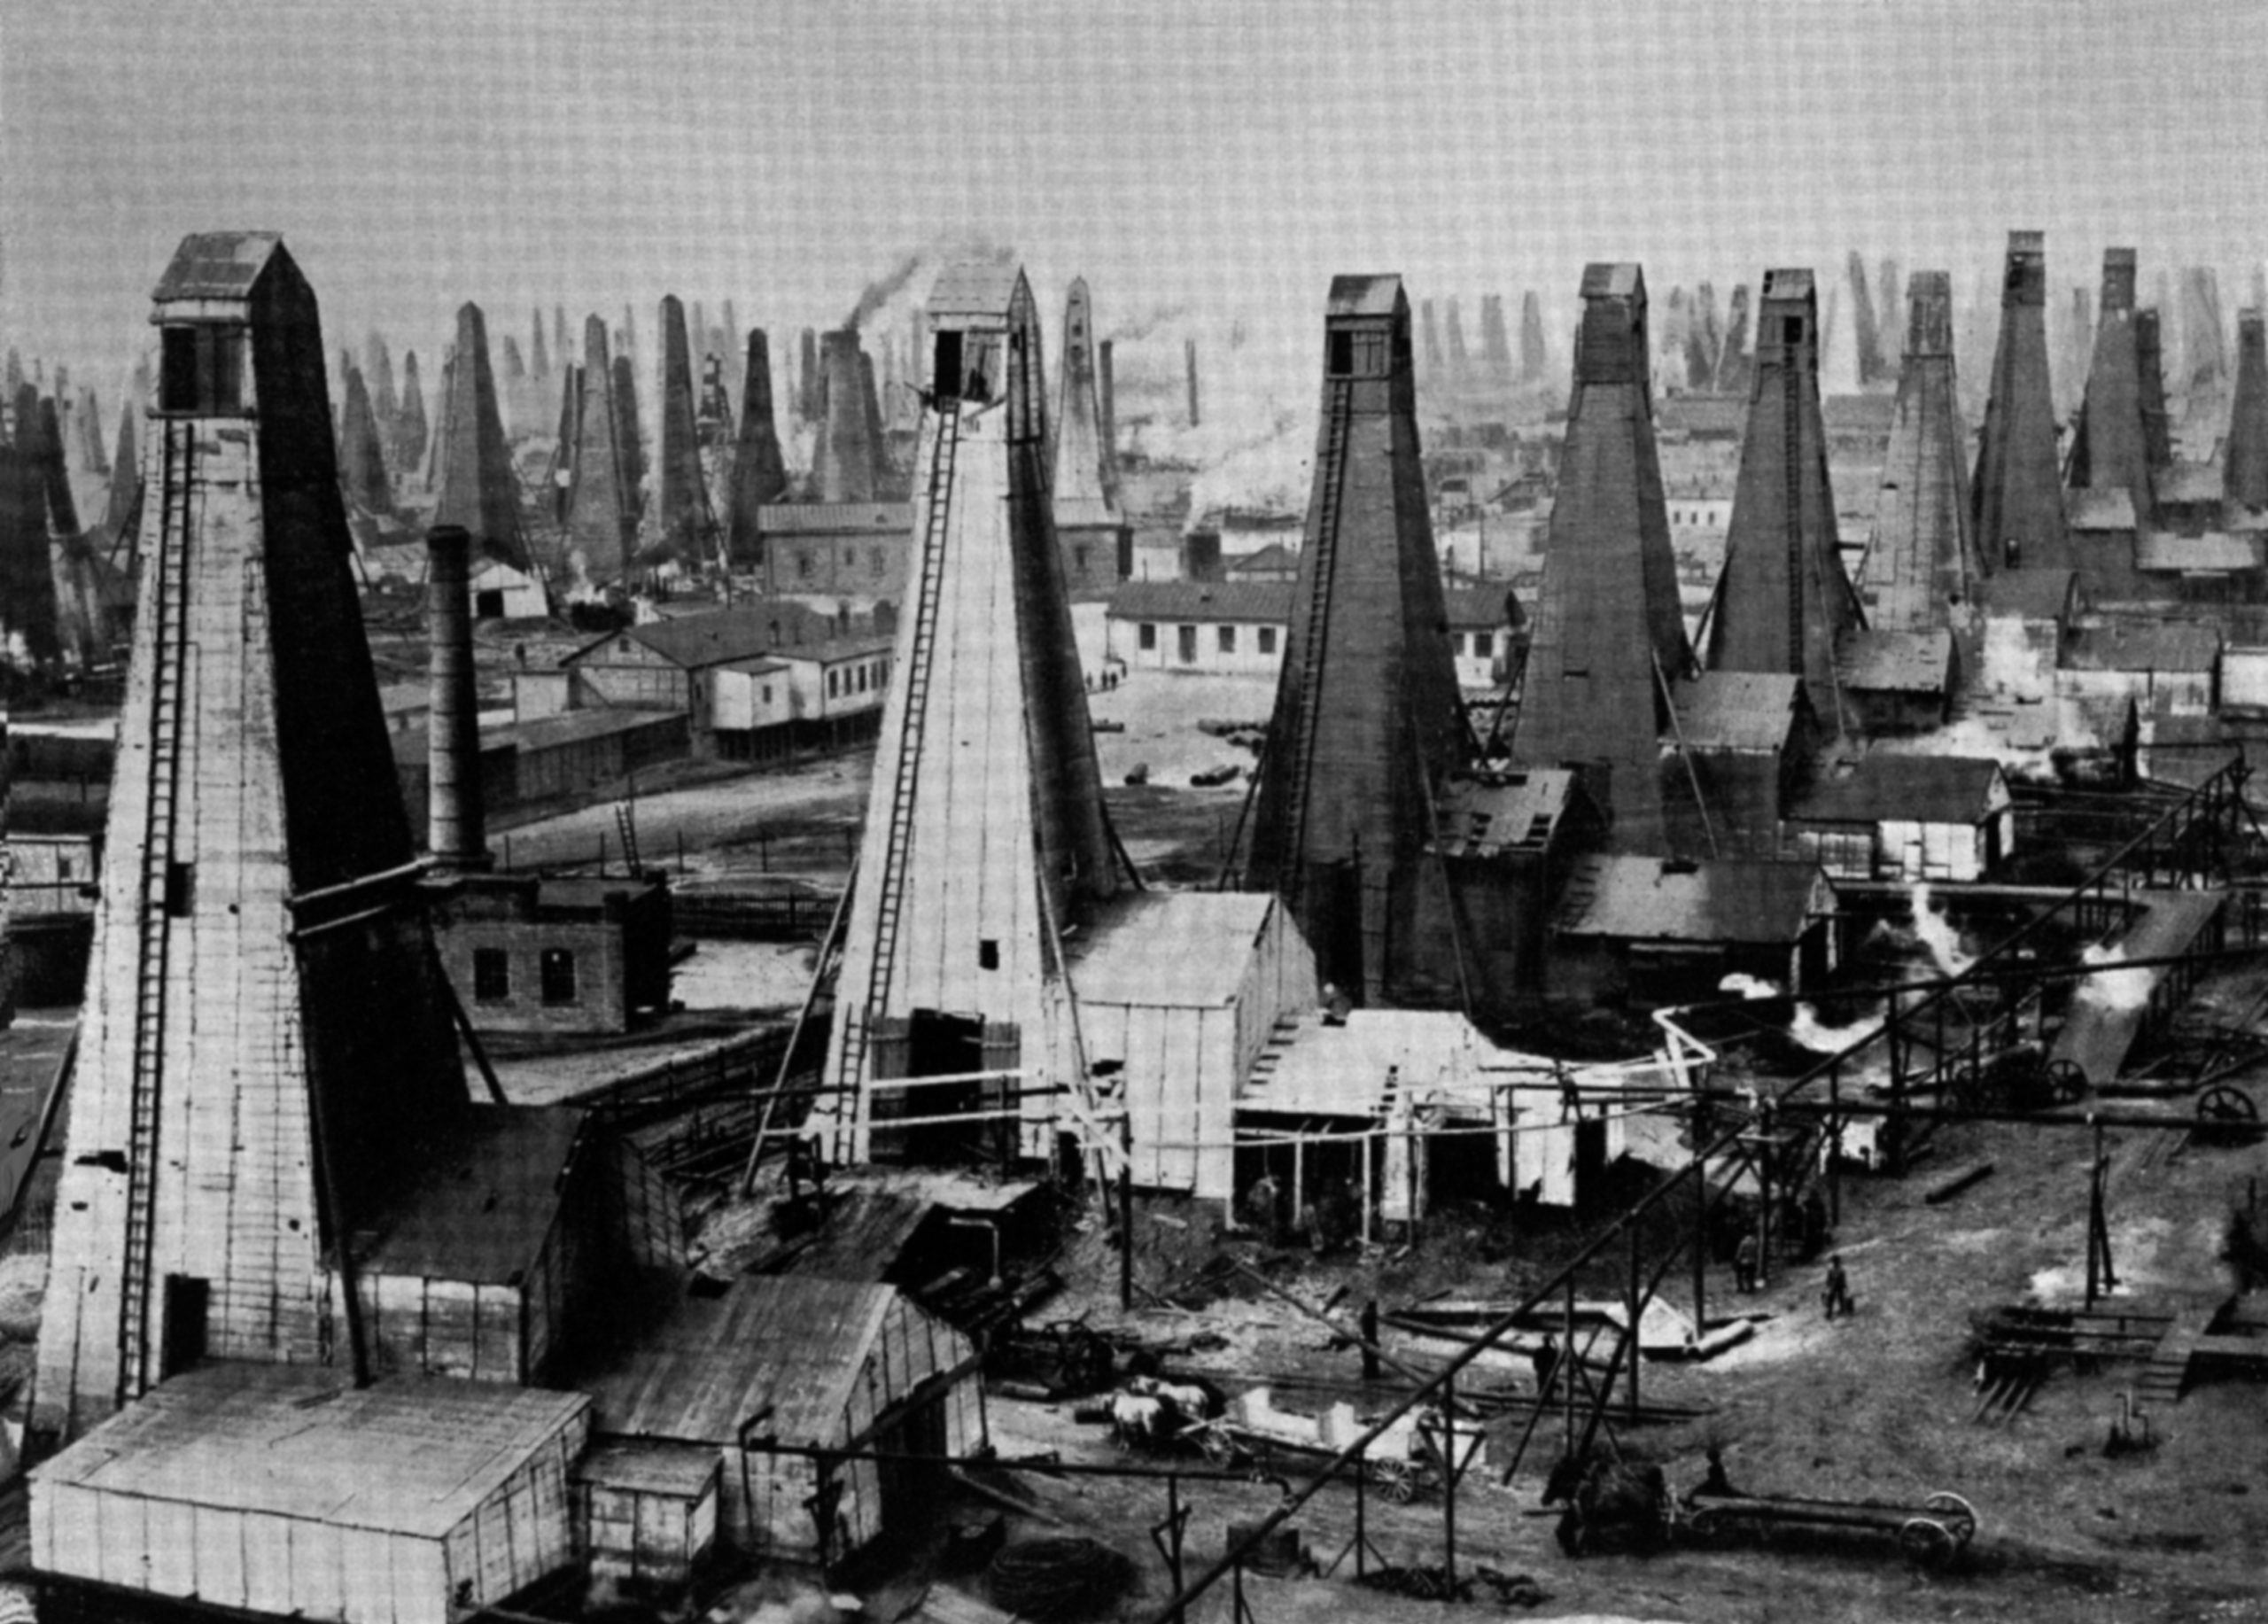 By 1909, the Balachany field in Baku had as many as 276 oil rigs.